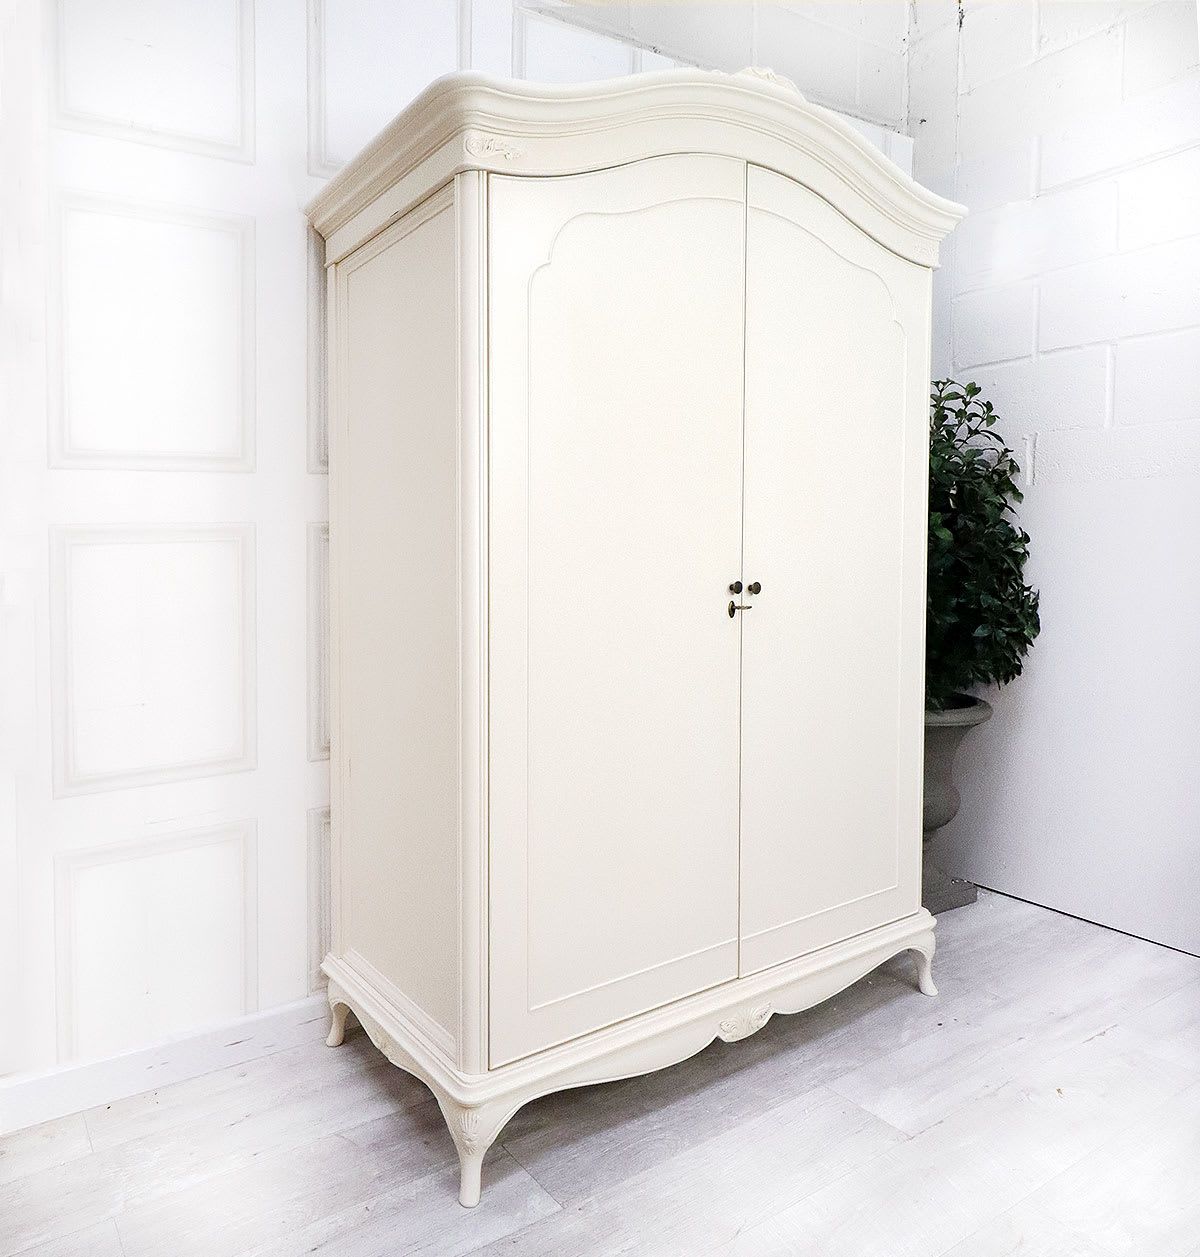 Willis & Gambier French Style Ivory Large Armoire Wardrobe | Nicky Cornell  A Uk Stockist Throughout White French Style Wardrobes (Gallery 11 of 20)